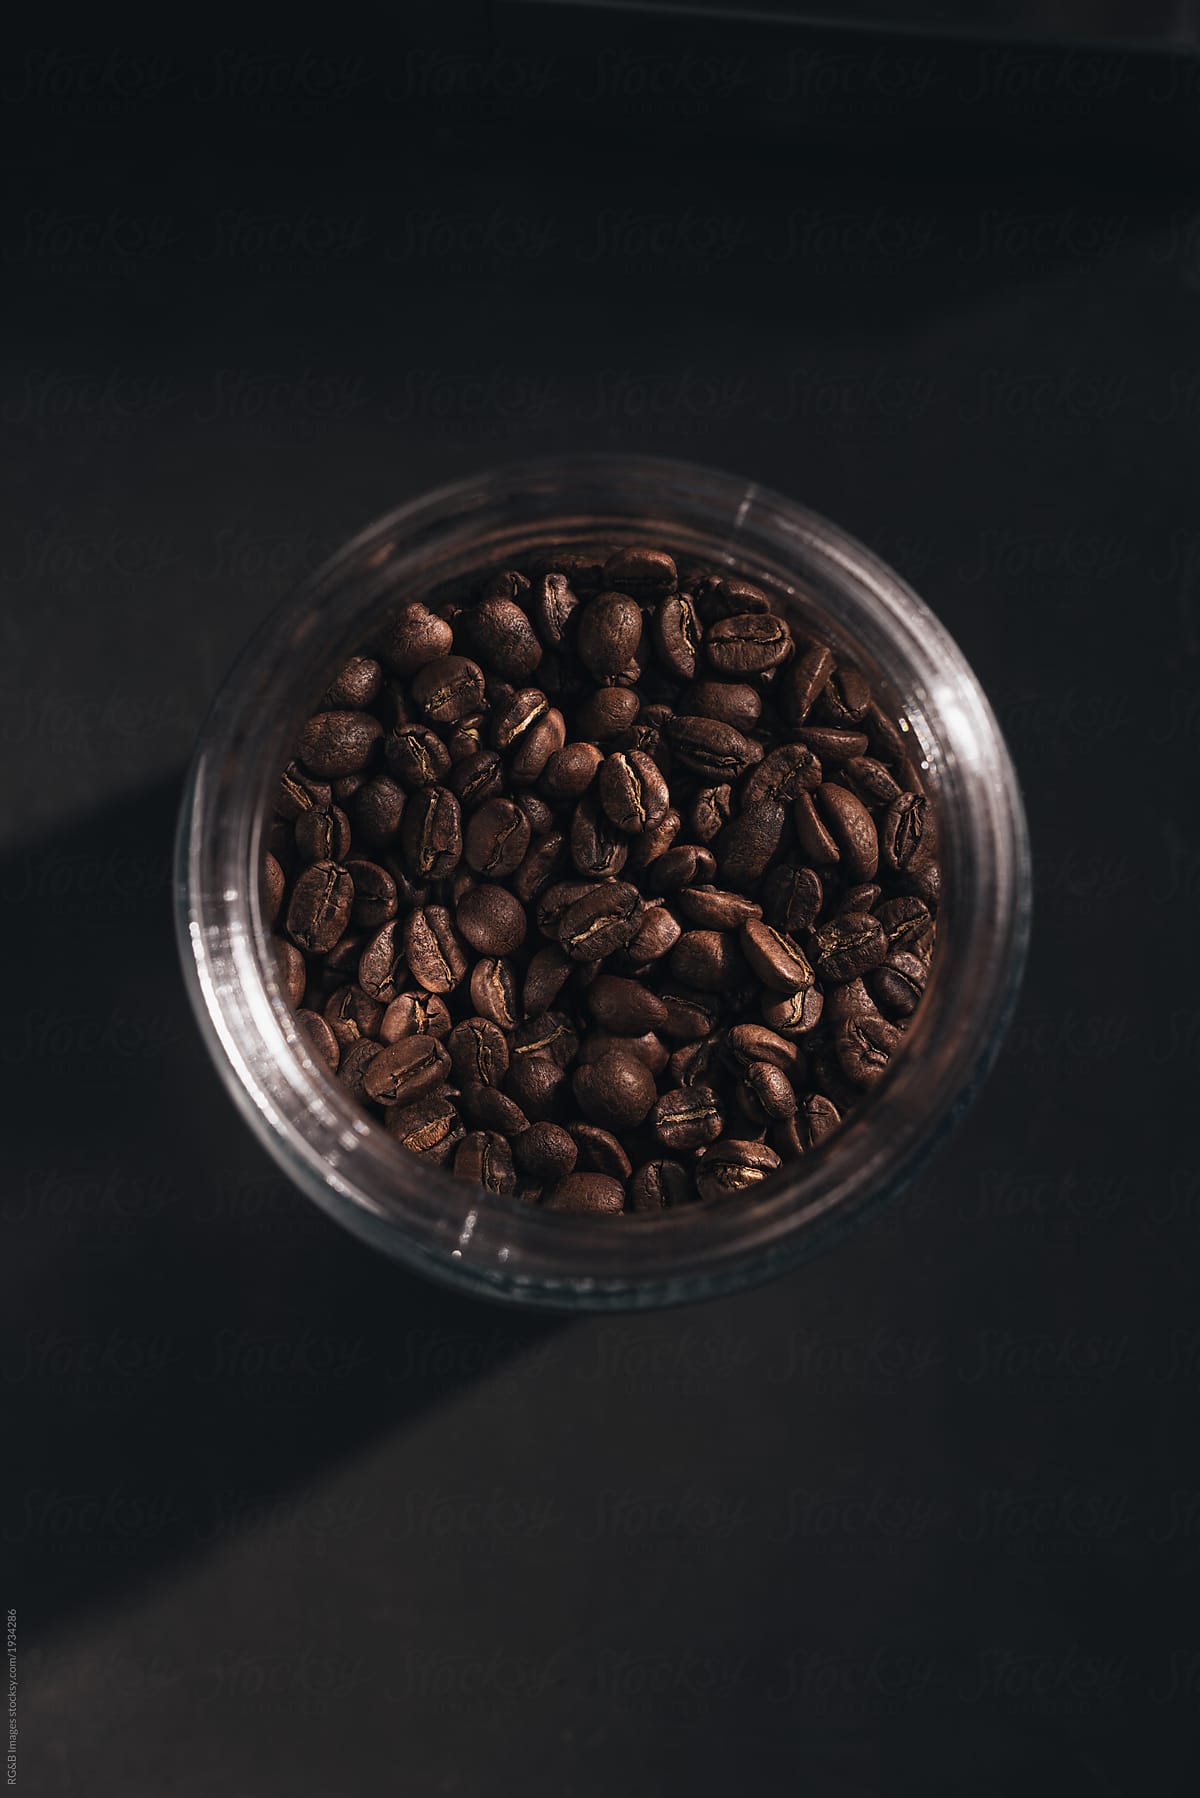 Above view of whole coffee beans in a jar